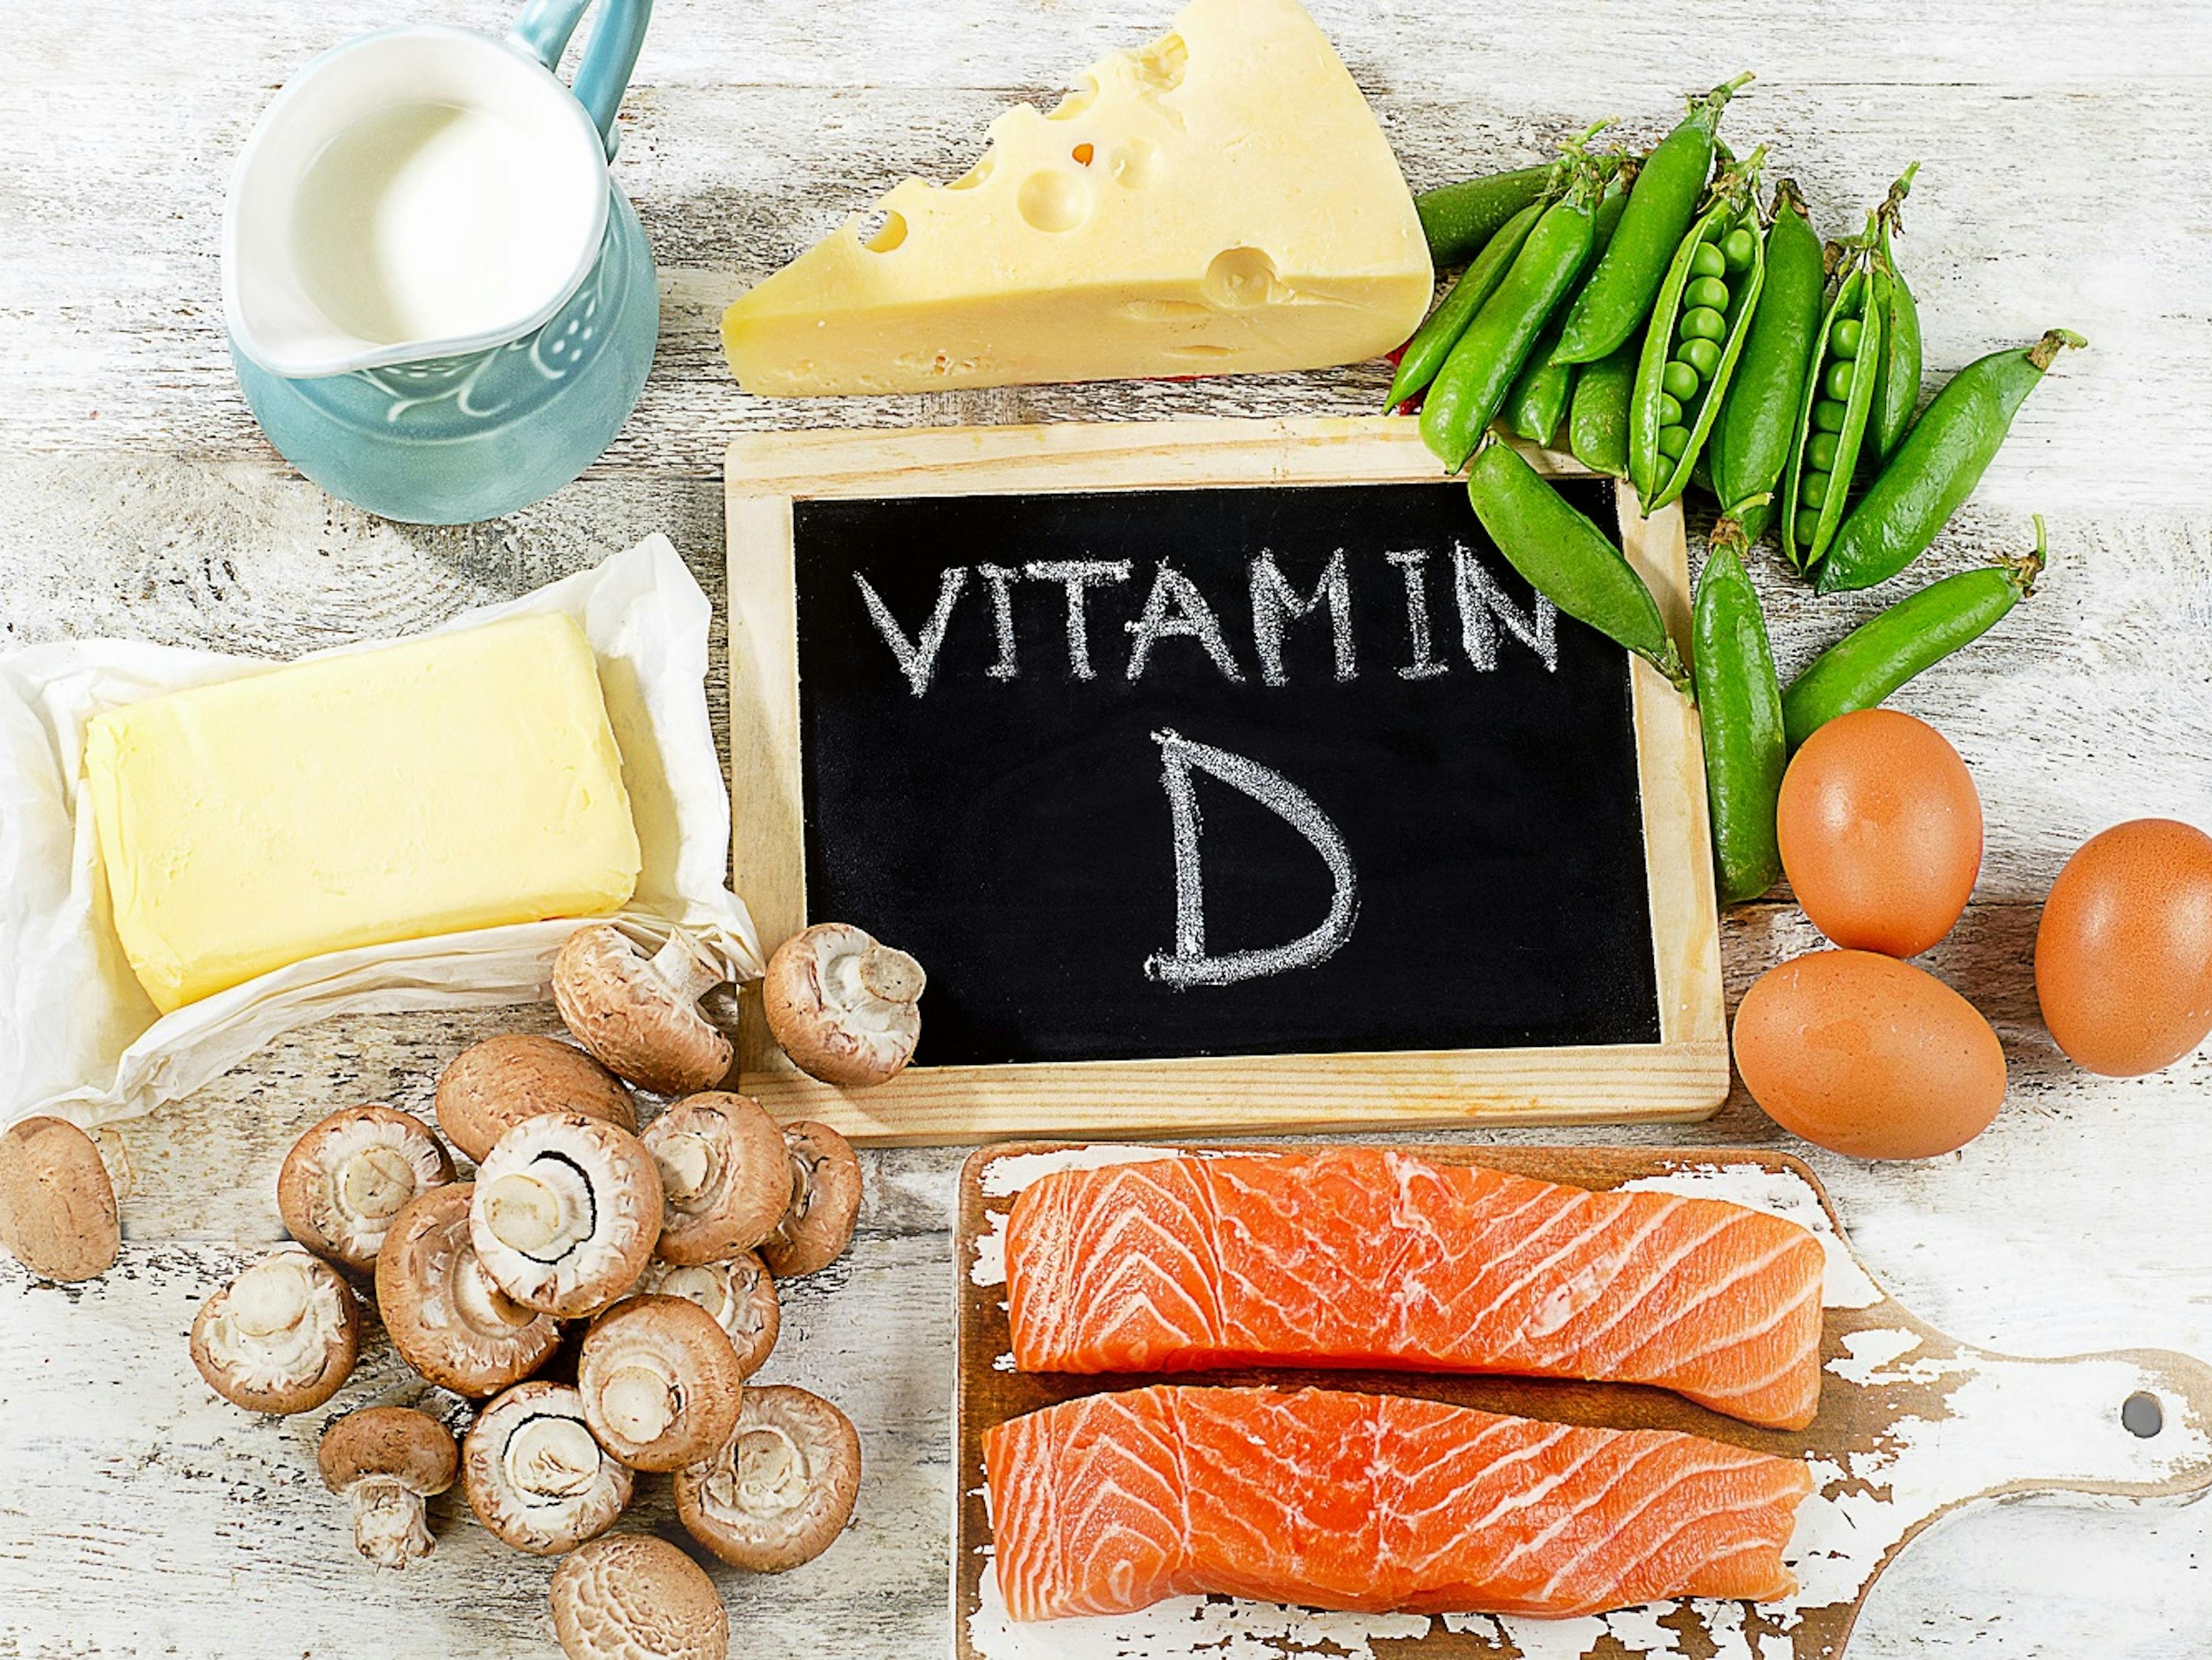 Does Medicare Cover a Vitamin D Test